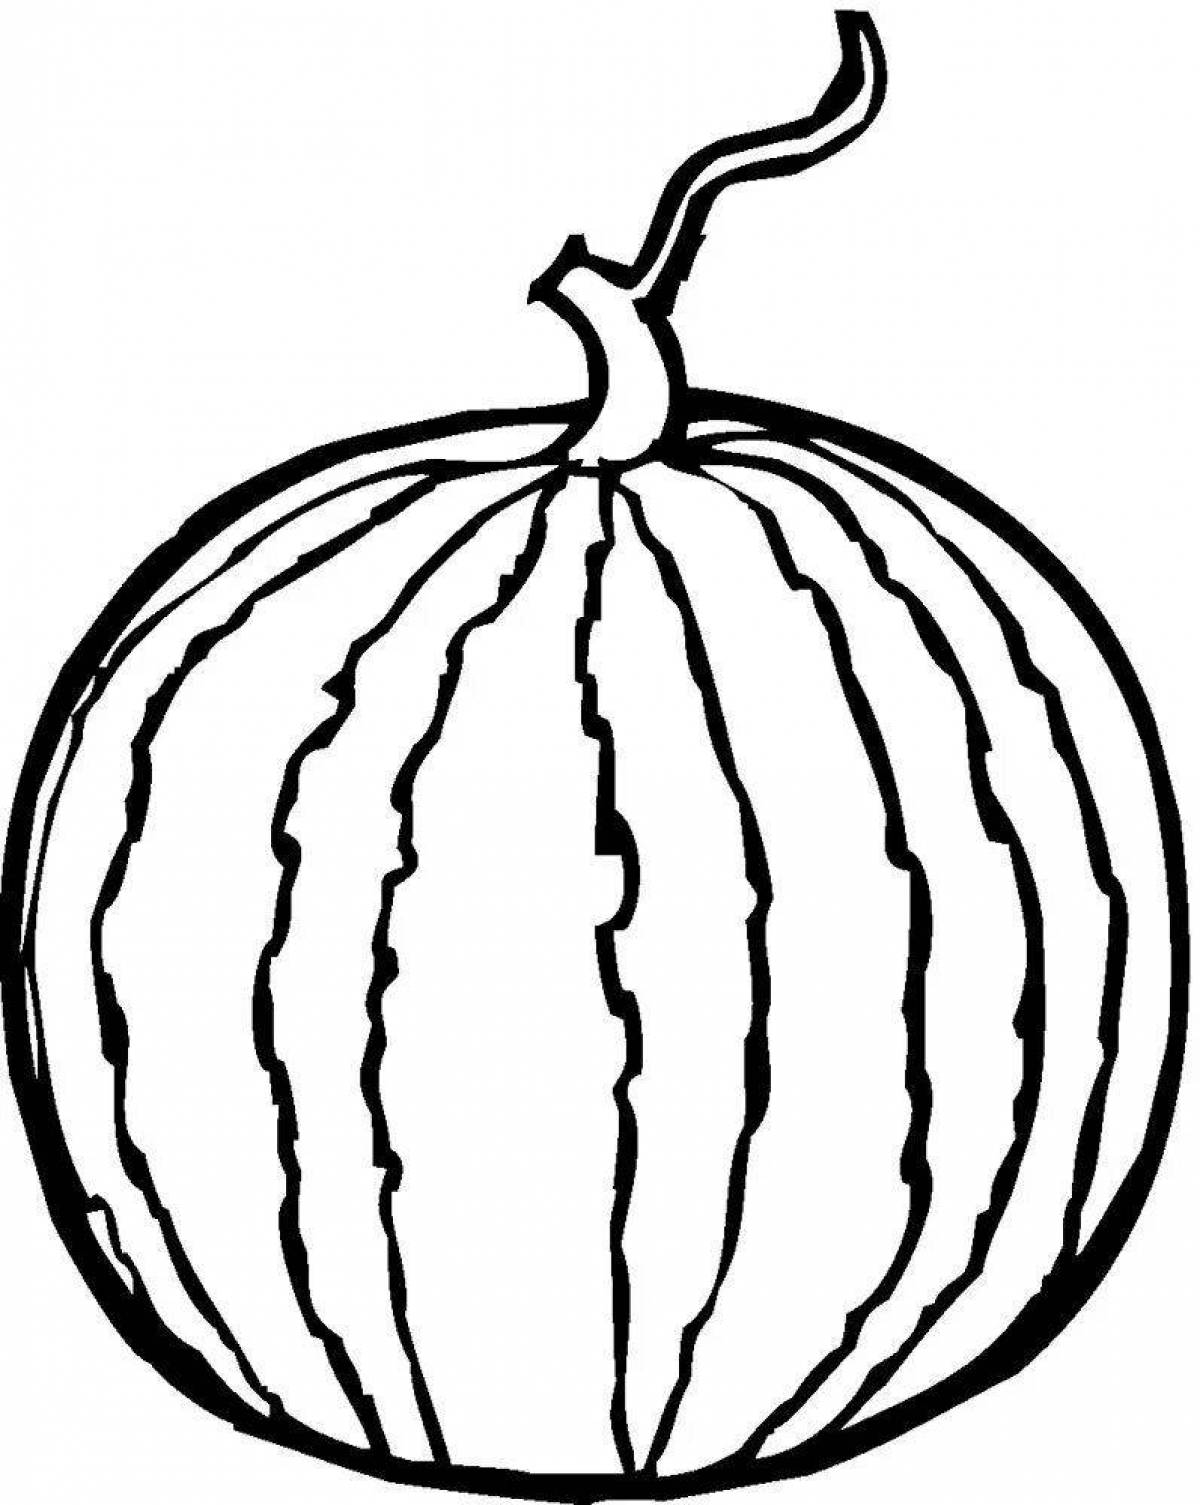 Drawing of a watermelon